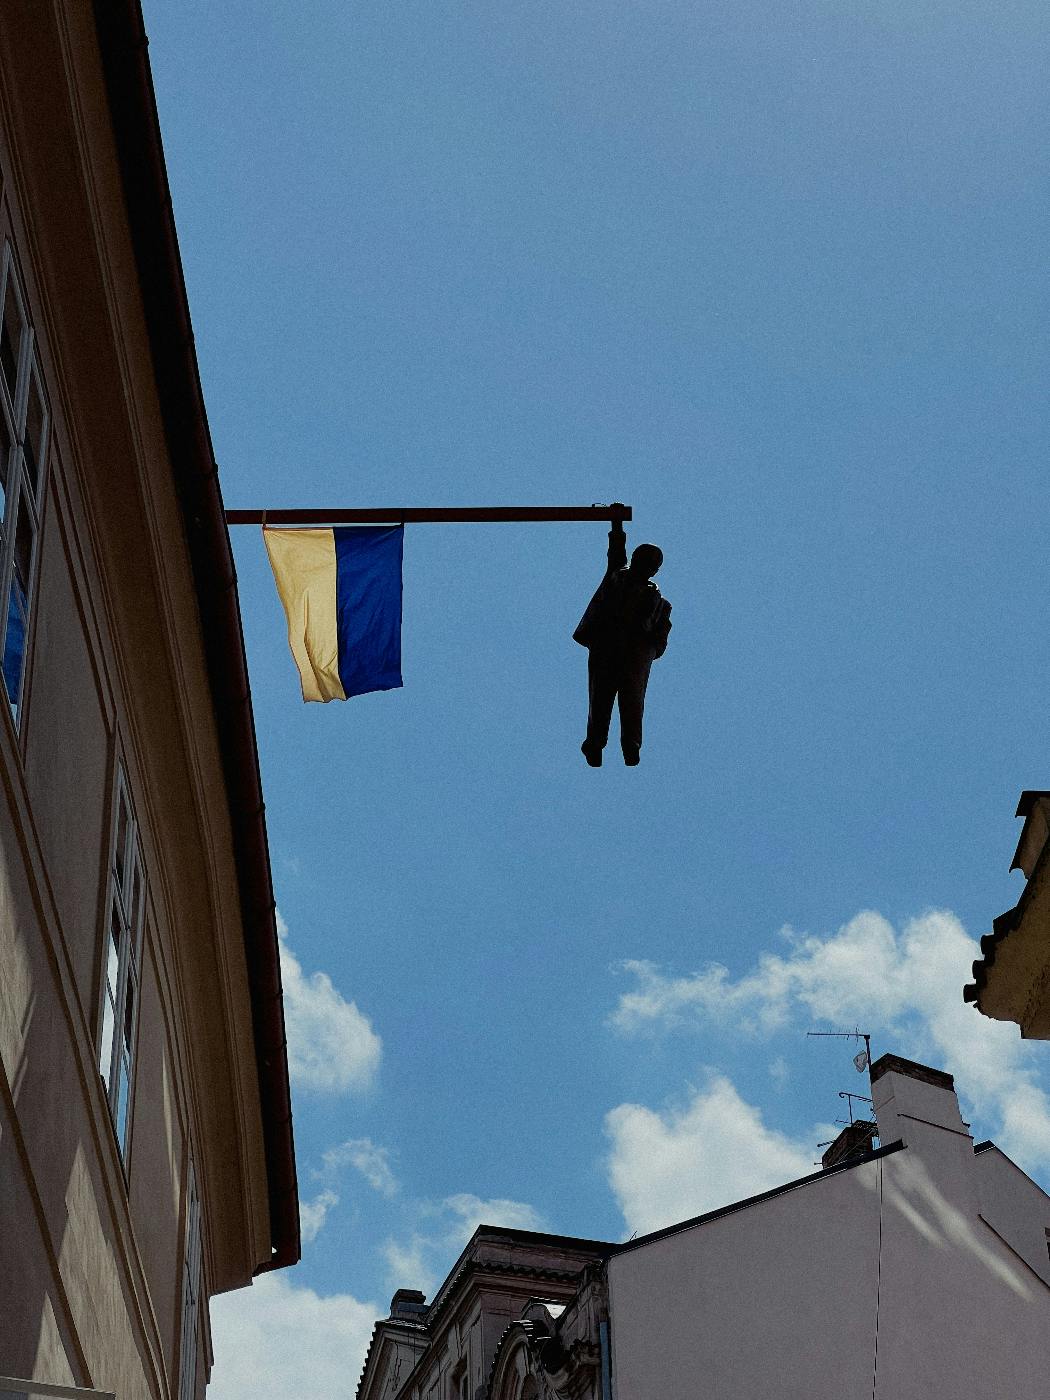 A flag pole off a building with a statue of a man holding on to it